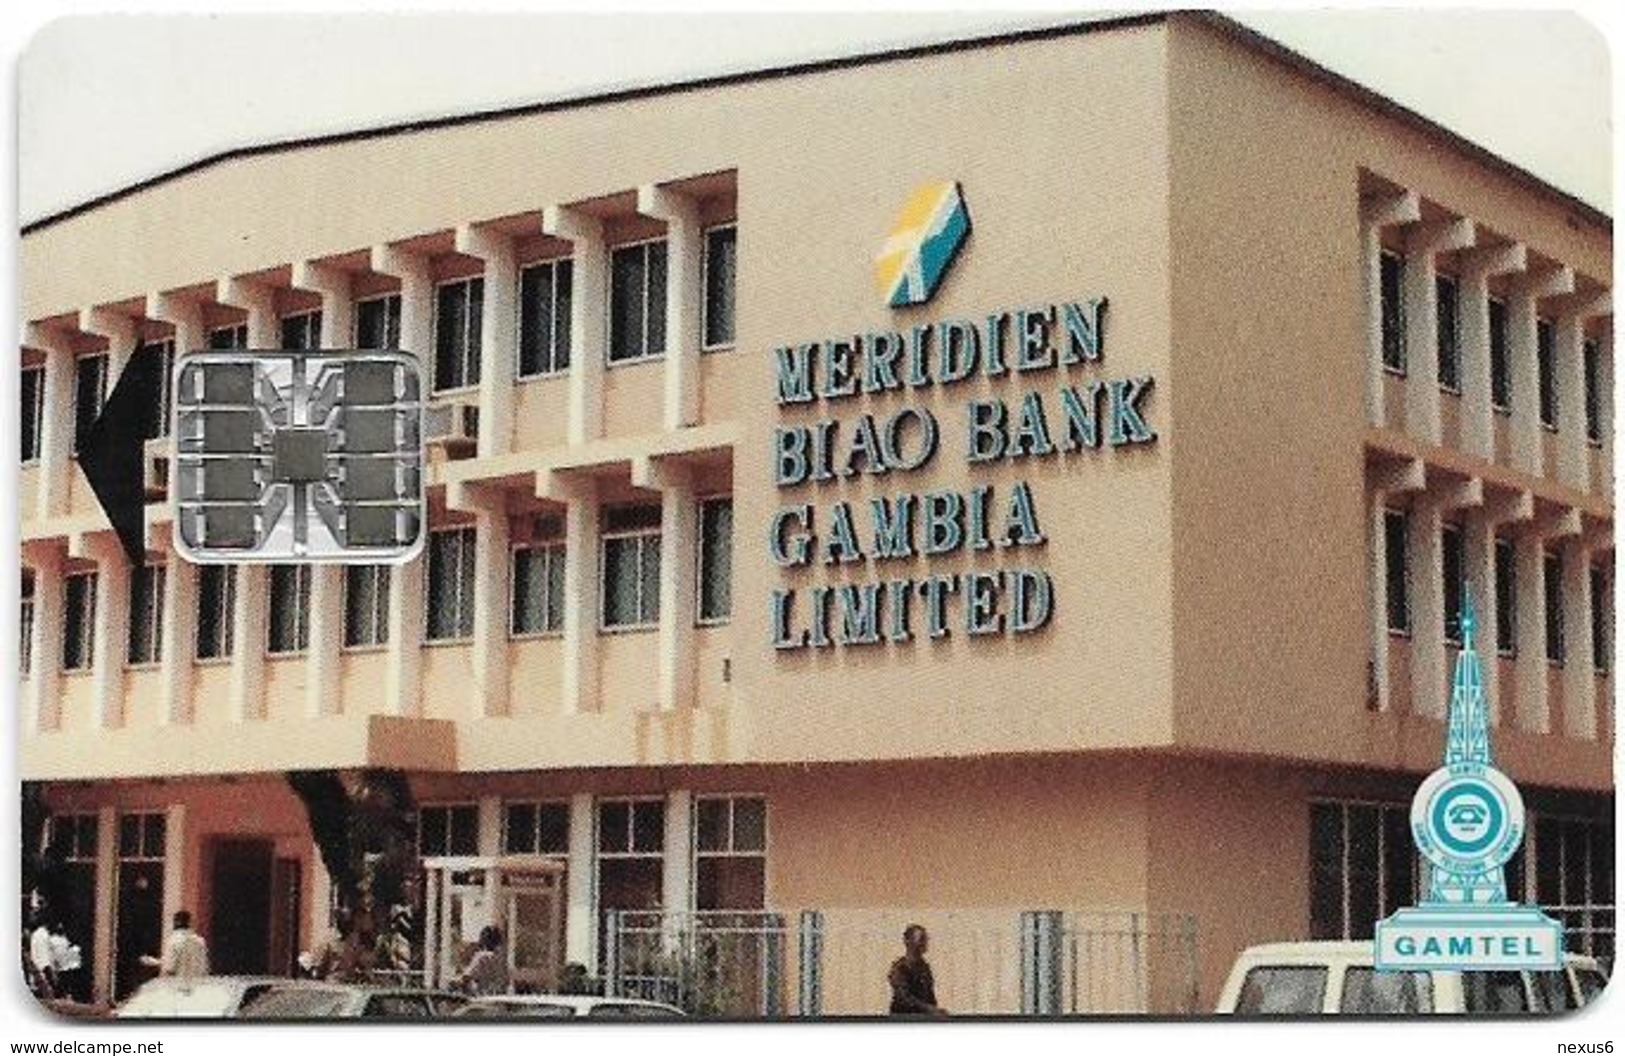 Gambia - Gamtel - Meridien Biao Bank (Small Cn. C4C), SC7, 60Units, Used - Gambia